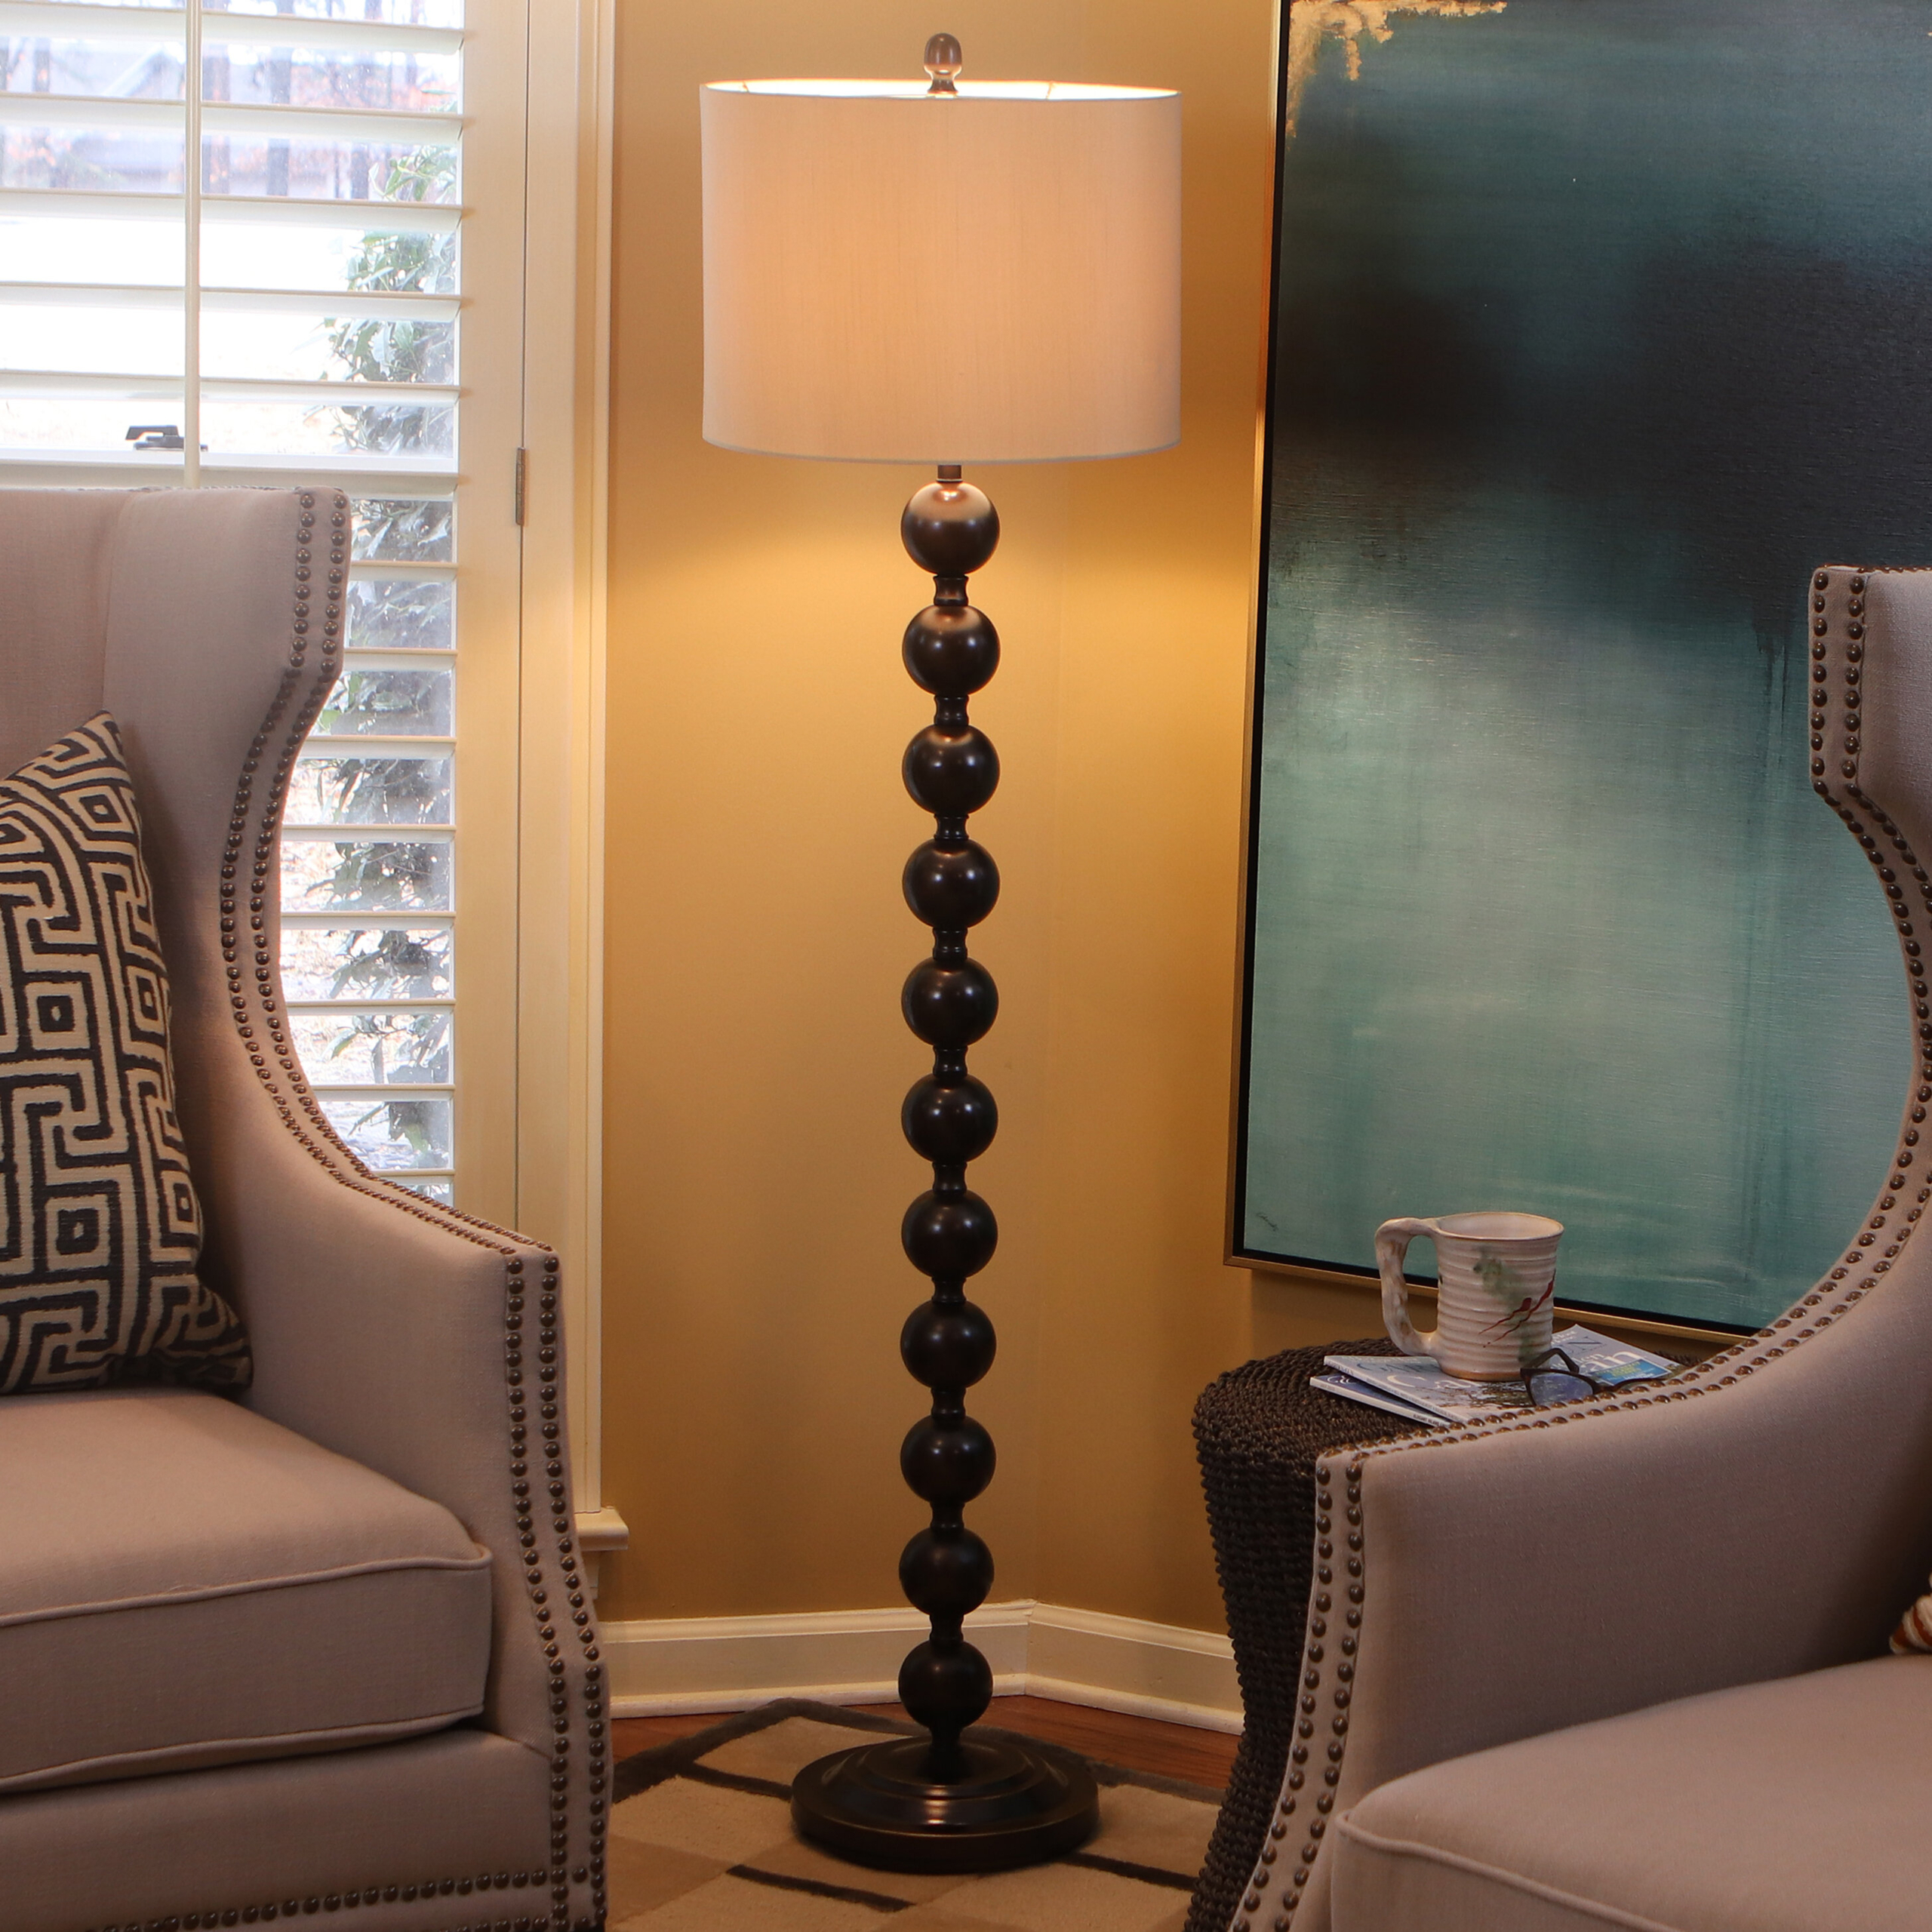 5 Expert Tips To Choose A Floor Lamp - VisualHunt